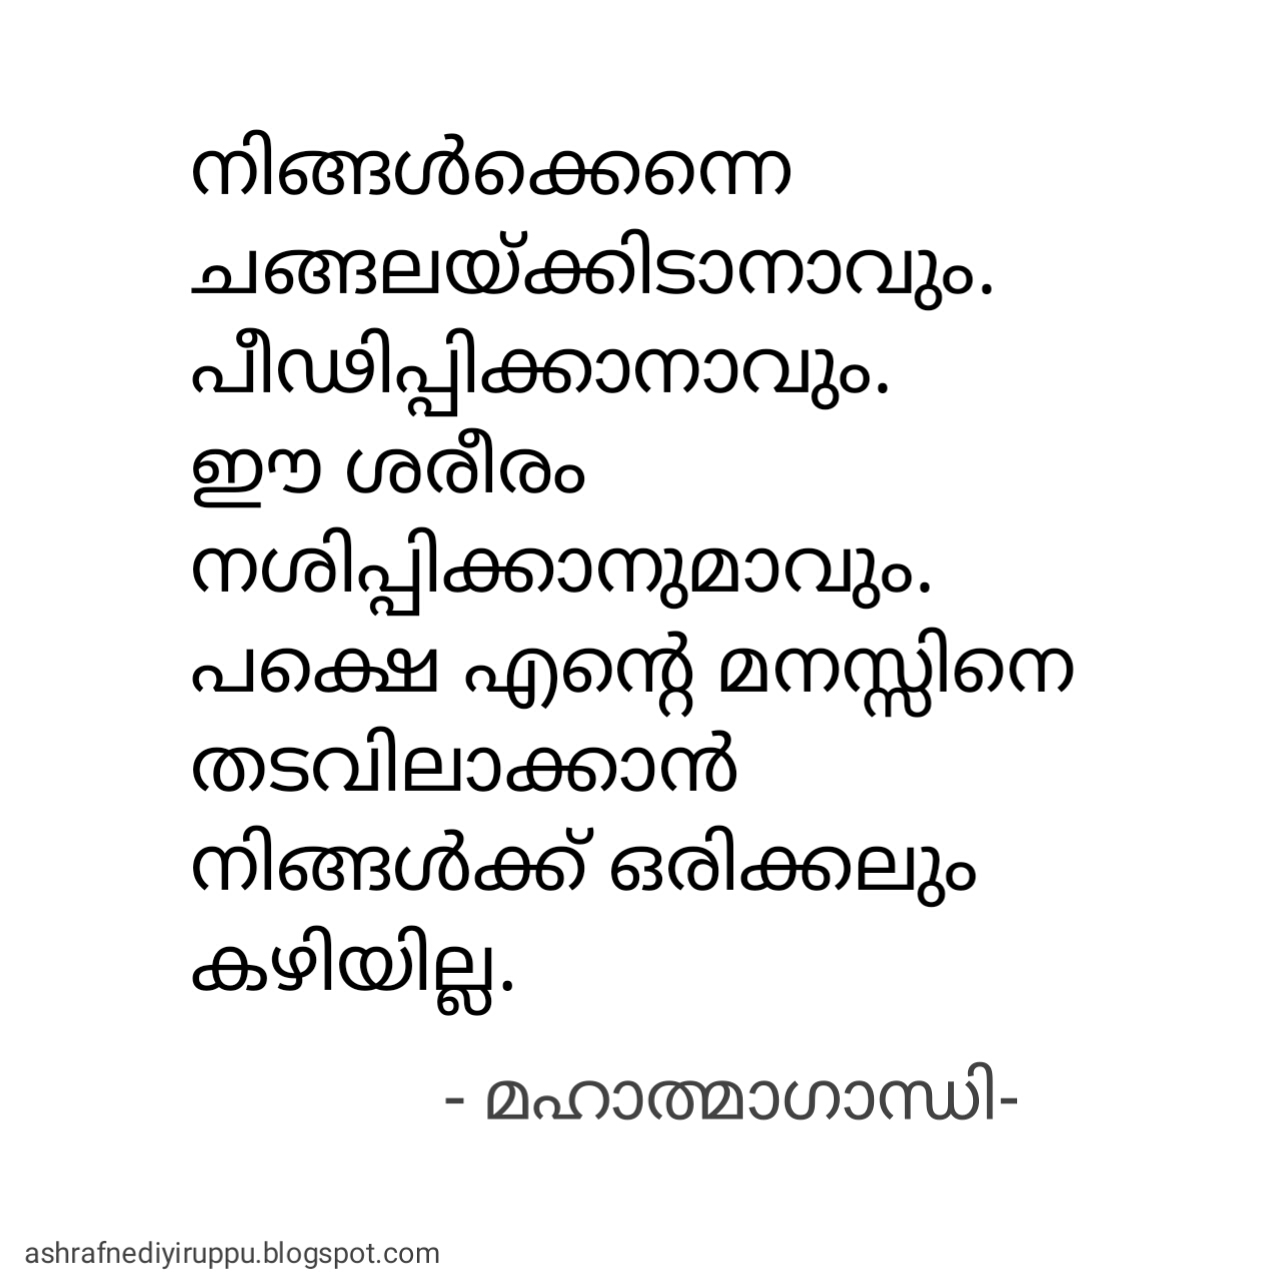 Positive Life Quotes Malayalam മഹ ത മ ഗ ന ധ